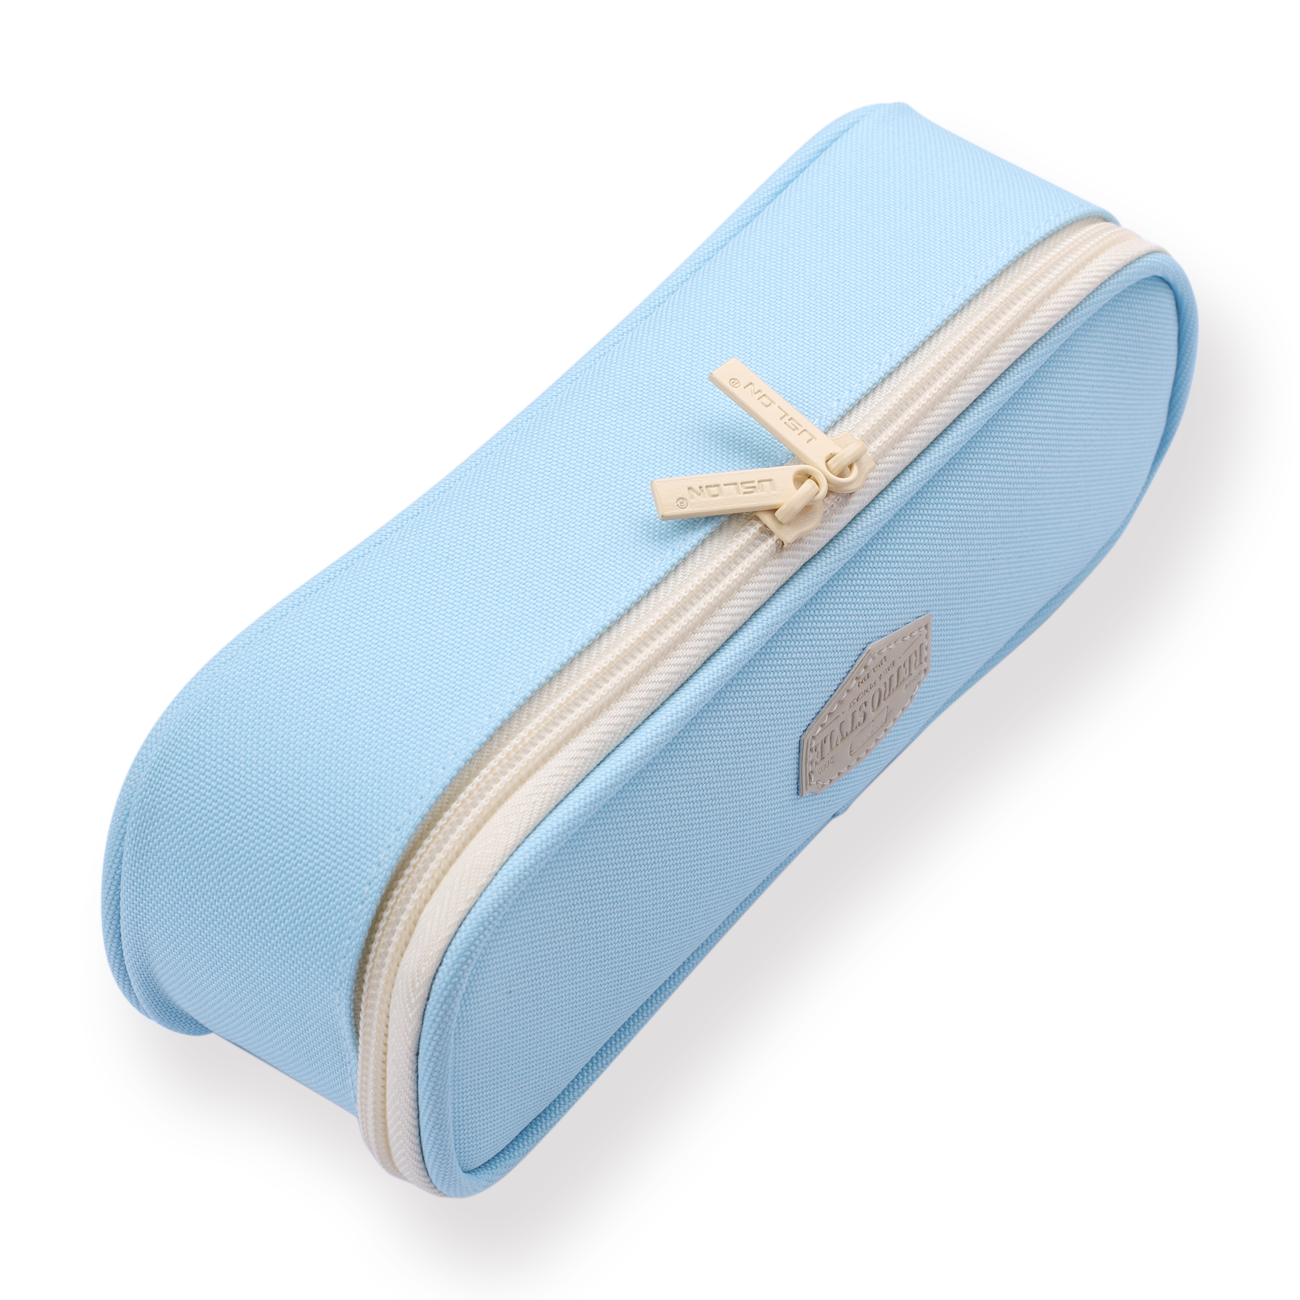 Stationery Pal Multi-functional Dual-Zippered Pencil Case - Sky Blue